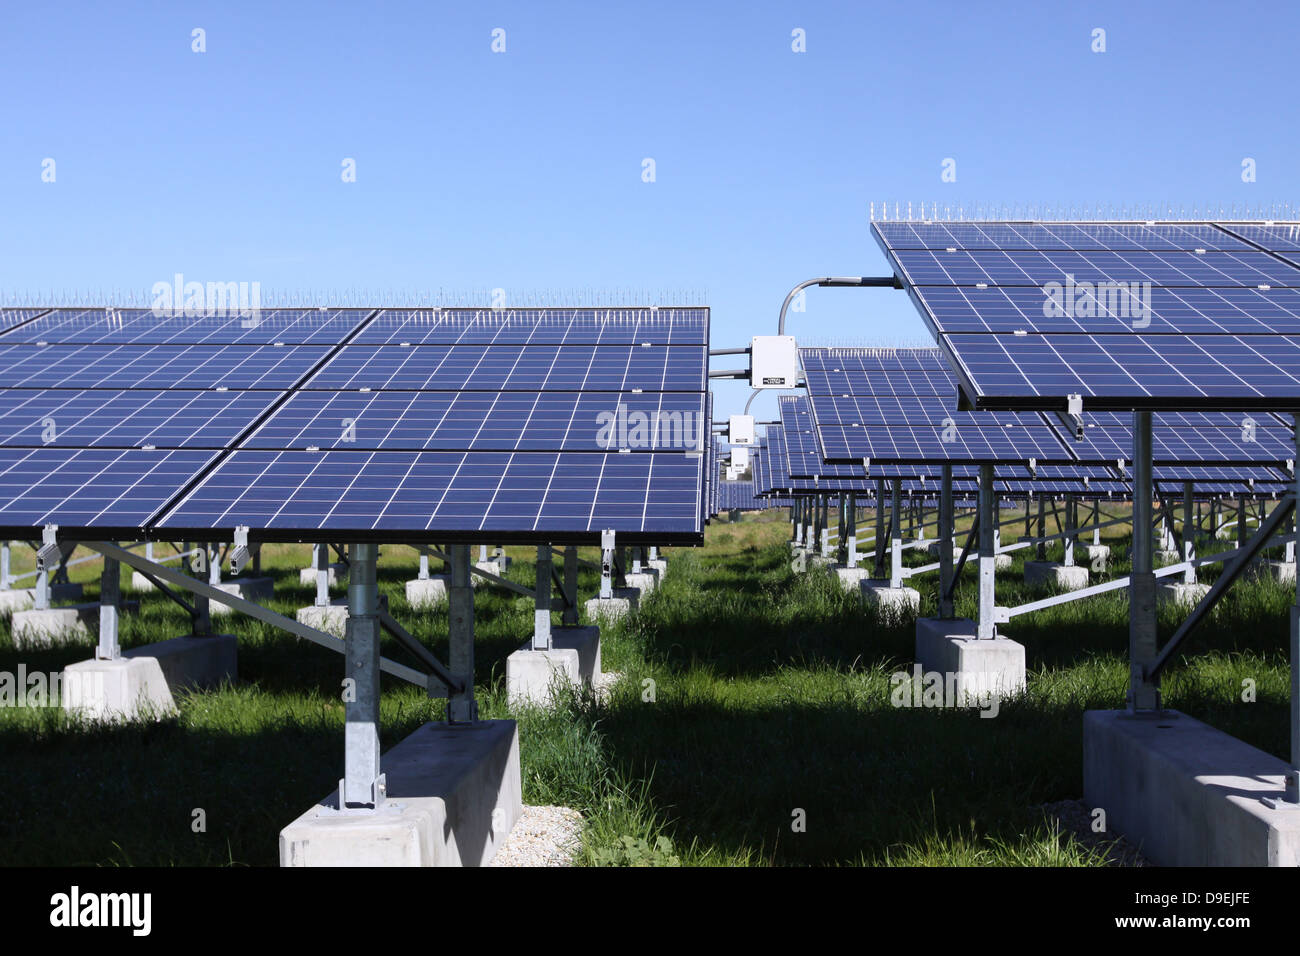 A photovoltaic system of solar cells. Stock Photo